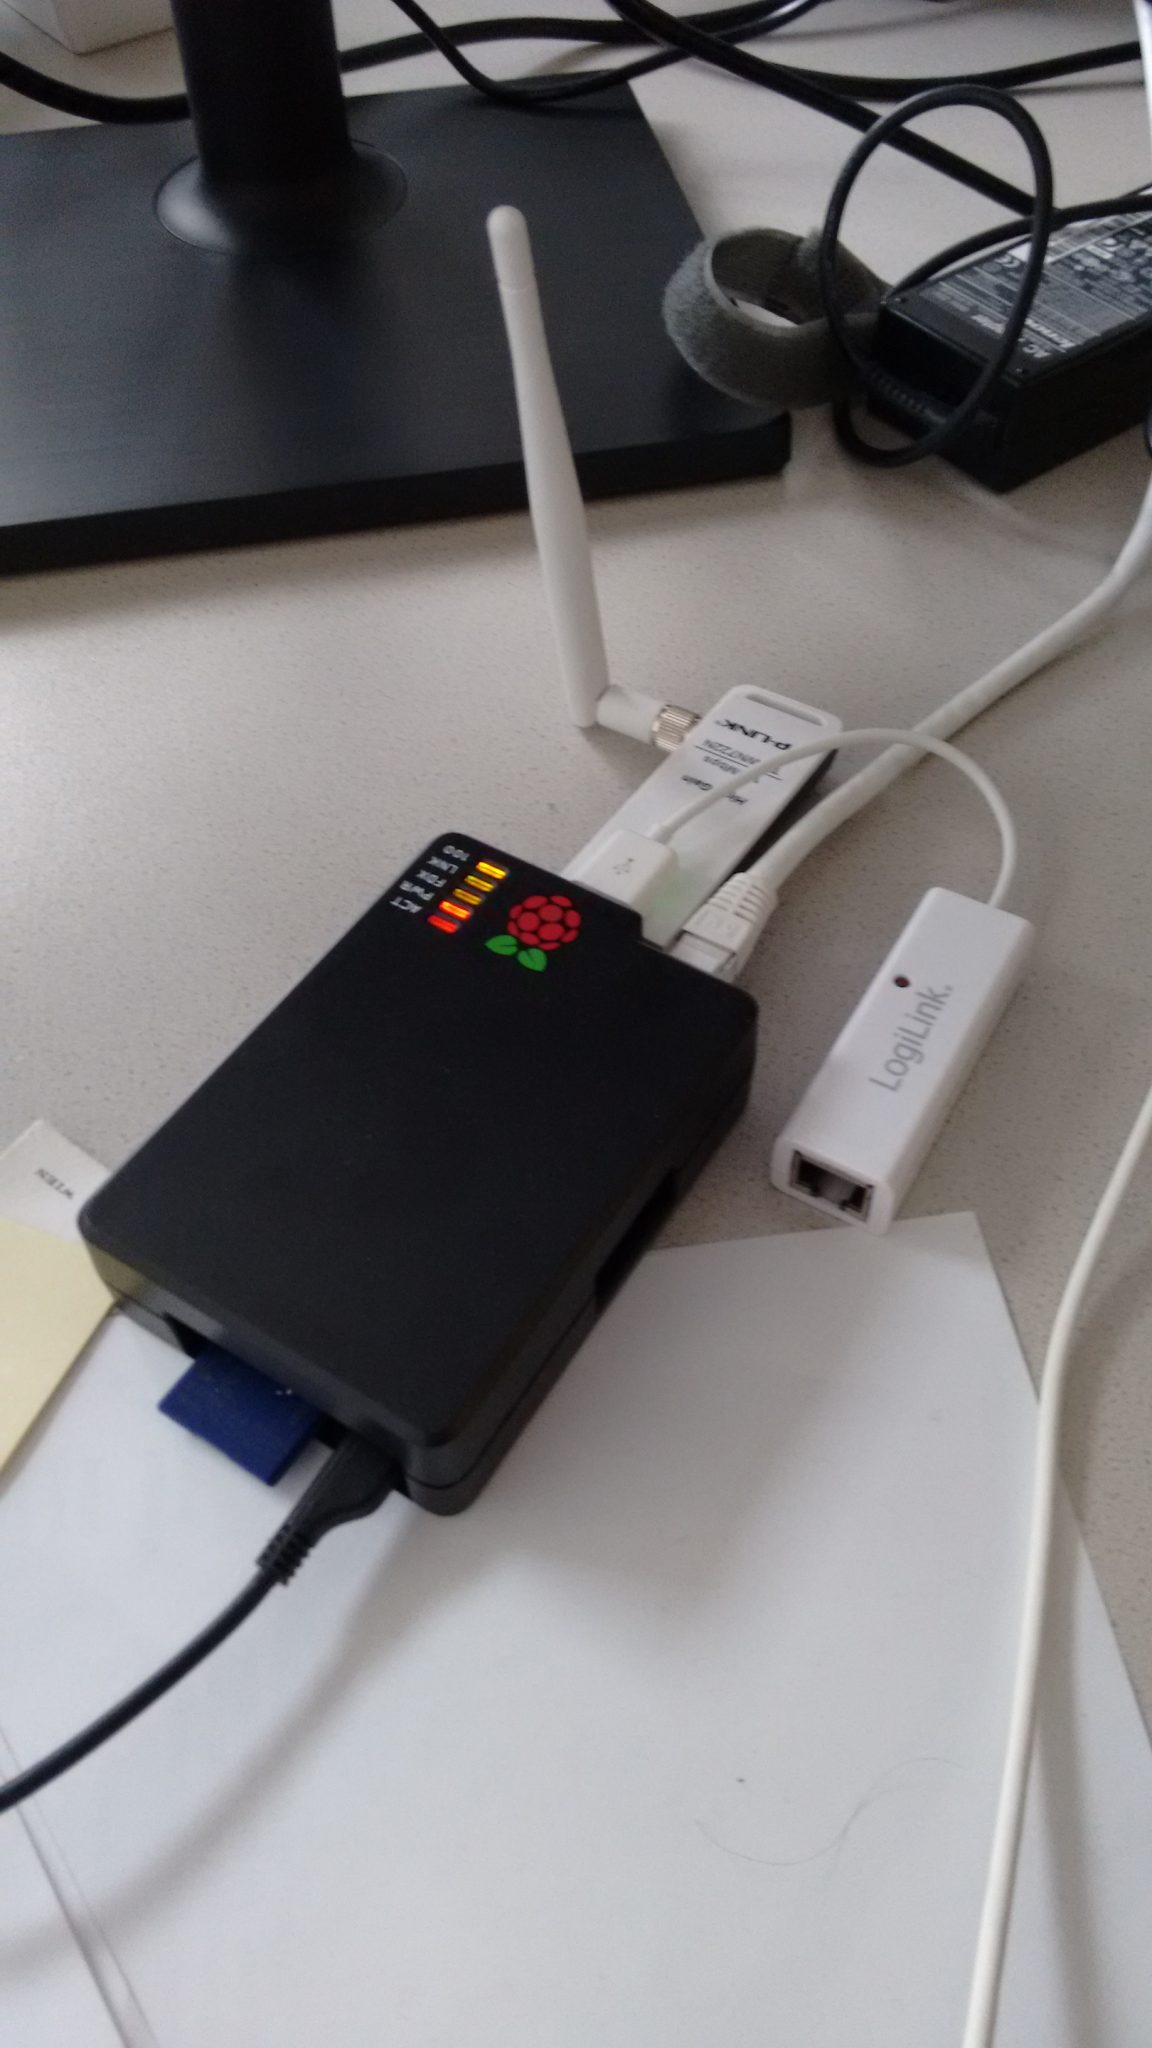 Raspberry Pi with Wifi and Ethernet USB Dongle